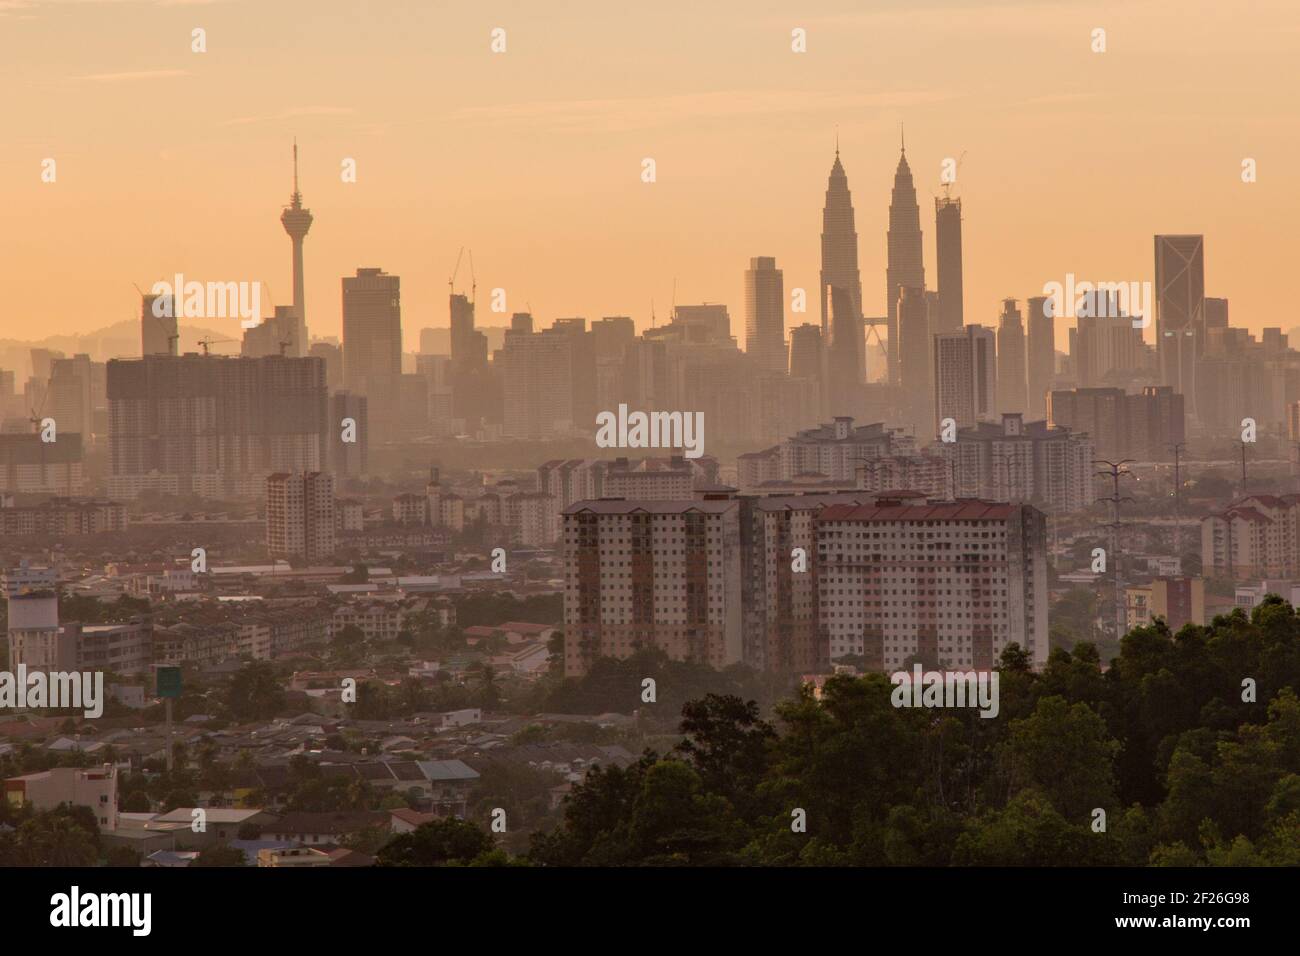 Kuala Lumpur cityscape at golden hour taken from a high viewpoint over looking the business district of the city and surrounding suburbs and hills Stock Photo